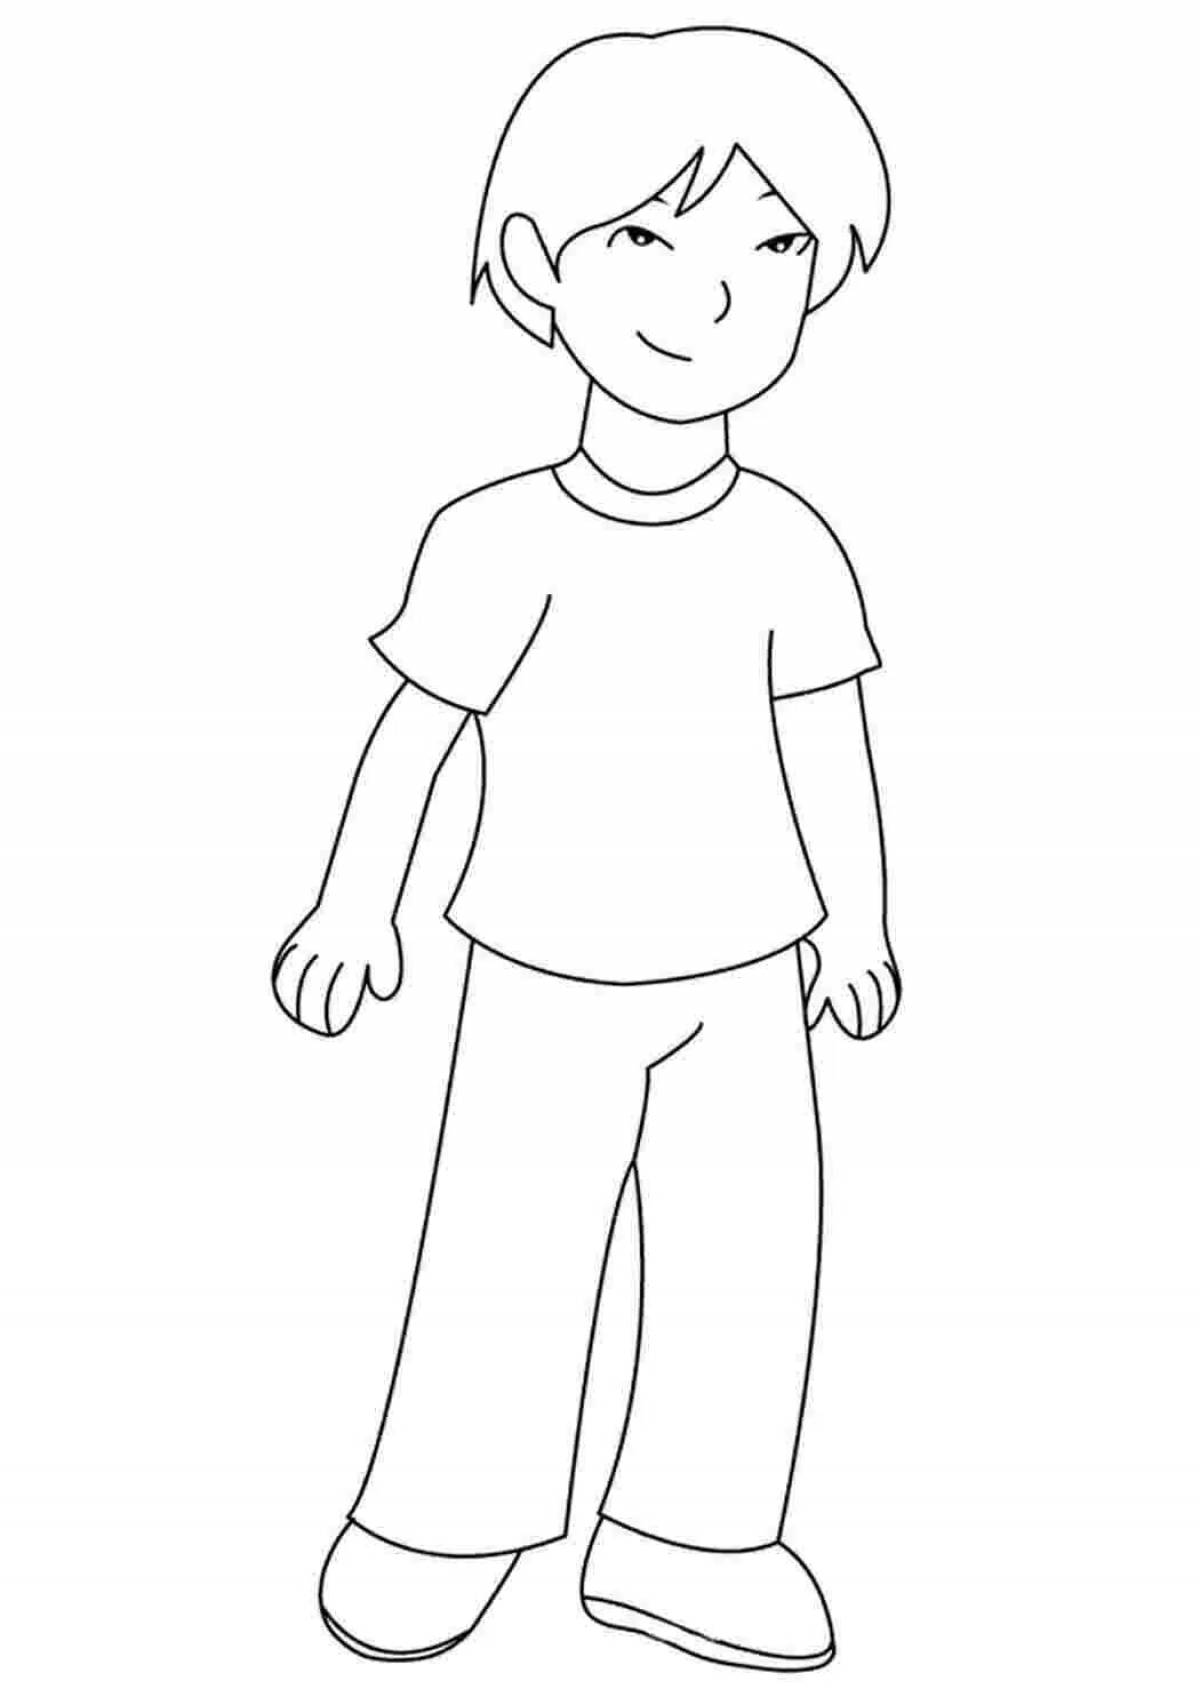 How to draw a person #24